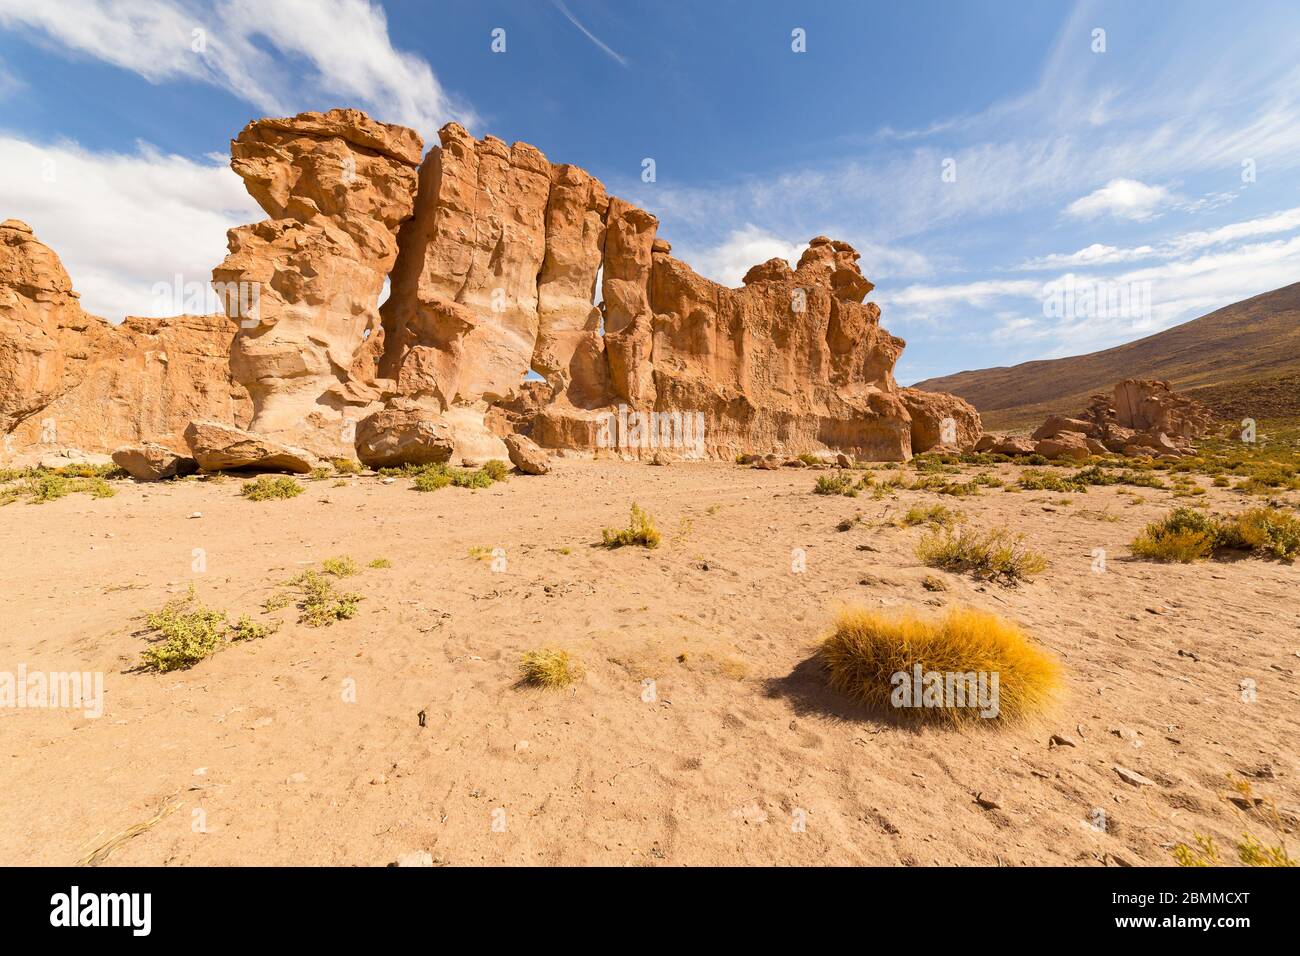 Eroded and bizarre formed orange colored rocks and boulders in Valle de Rocas, or Stone Valley, in the desert of southern Bolivia Stock Photo